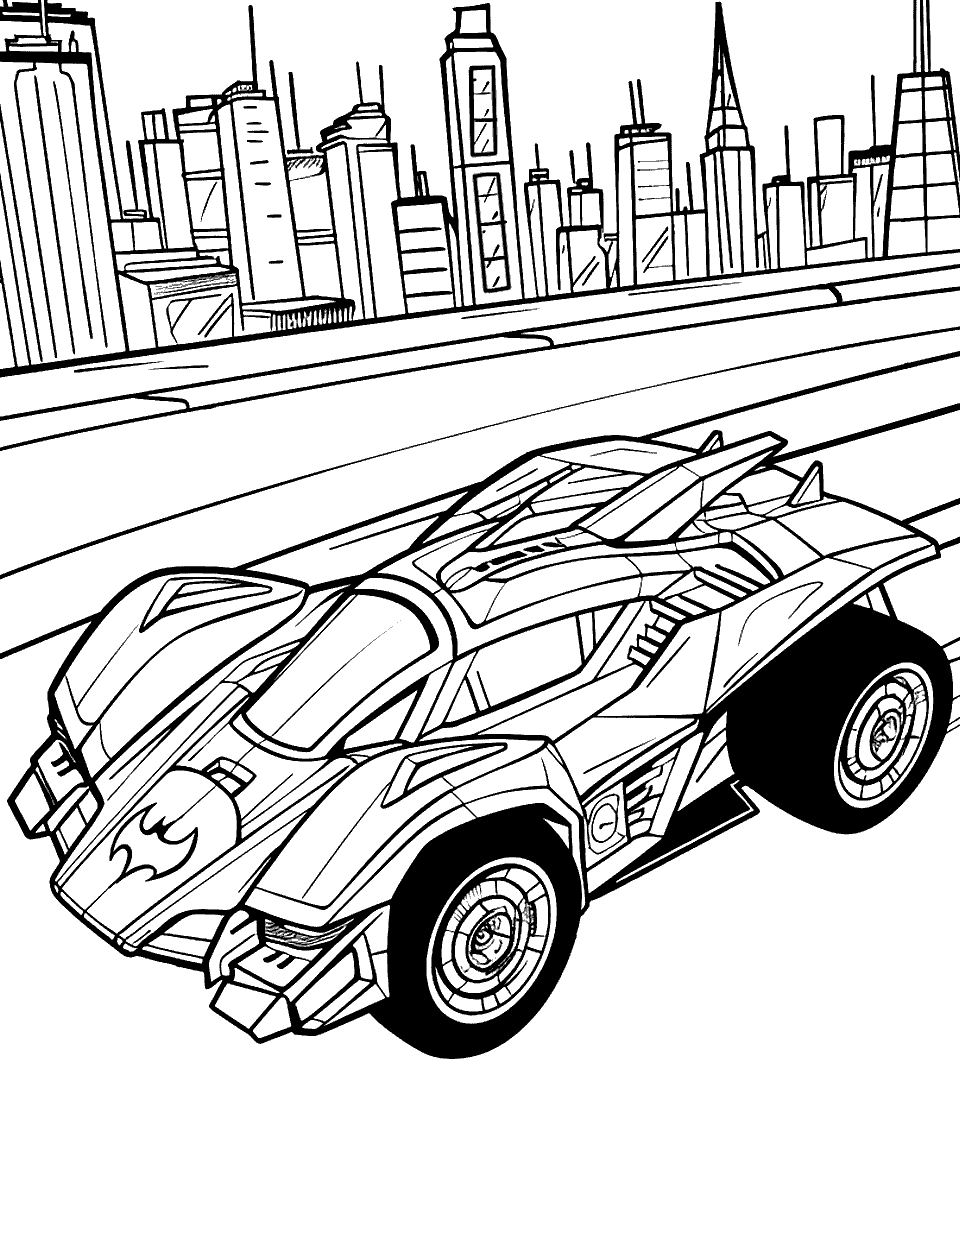 Batmobile Night Patrol Coloring Page - The Batmobile Hot Wheel cruises with Gotham’s skyline in the background.